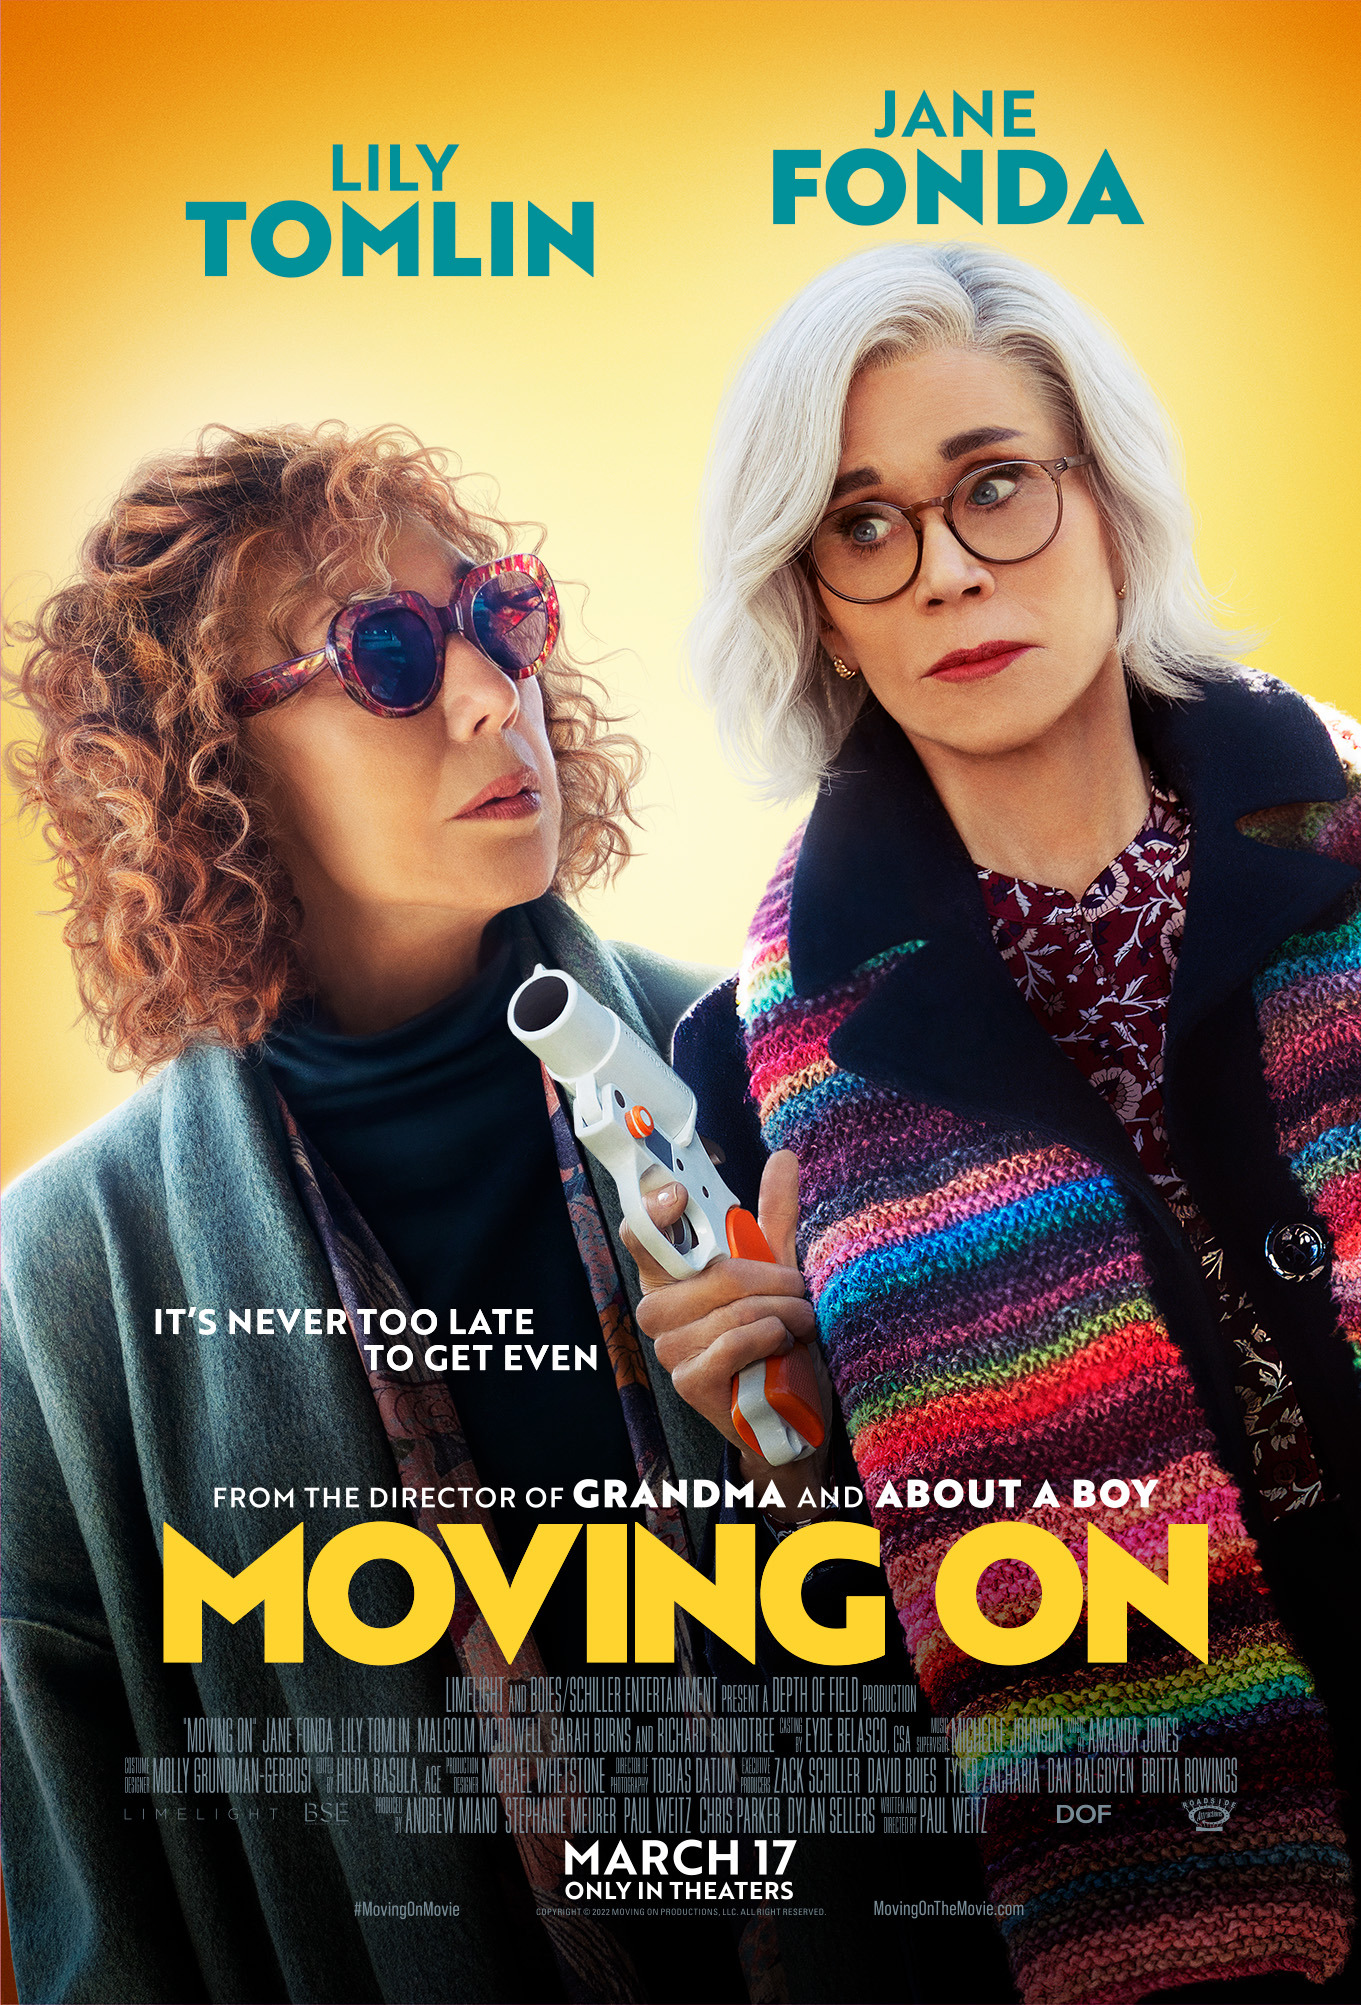 Cover Art for "Moving On"